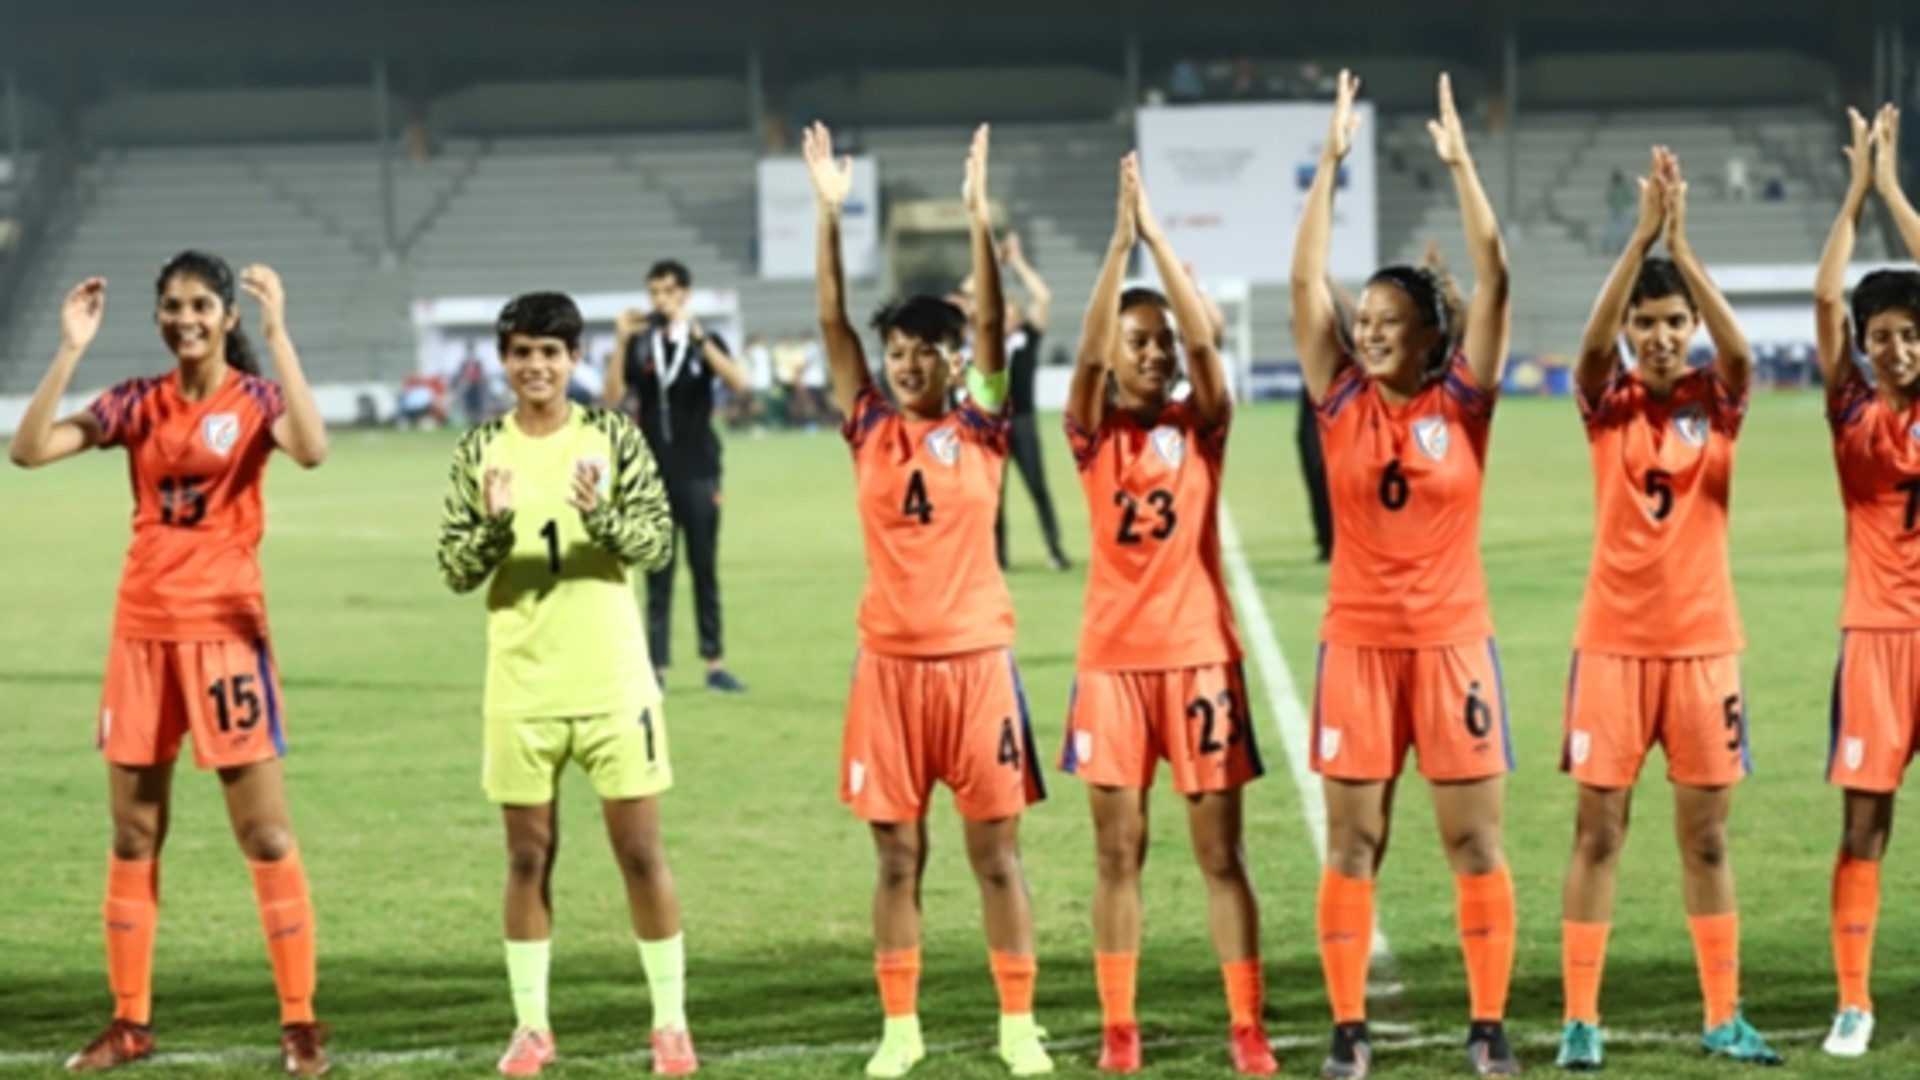 Women's football in India takes an important step forward in 2020